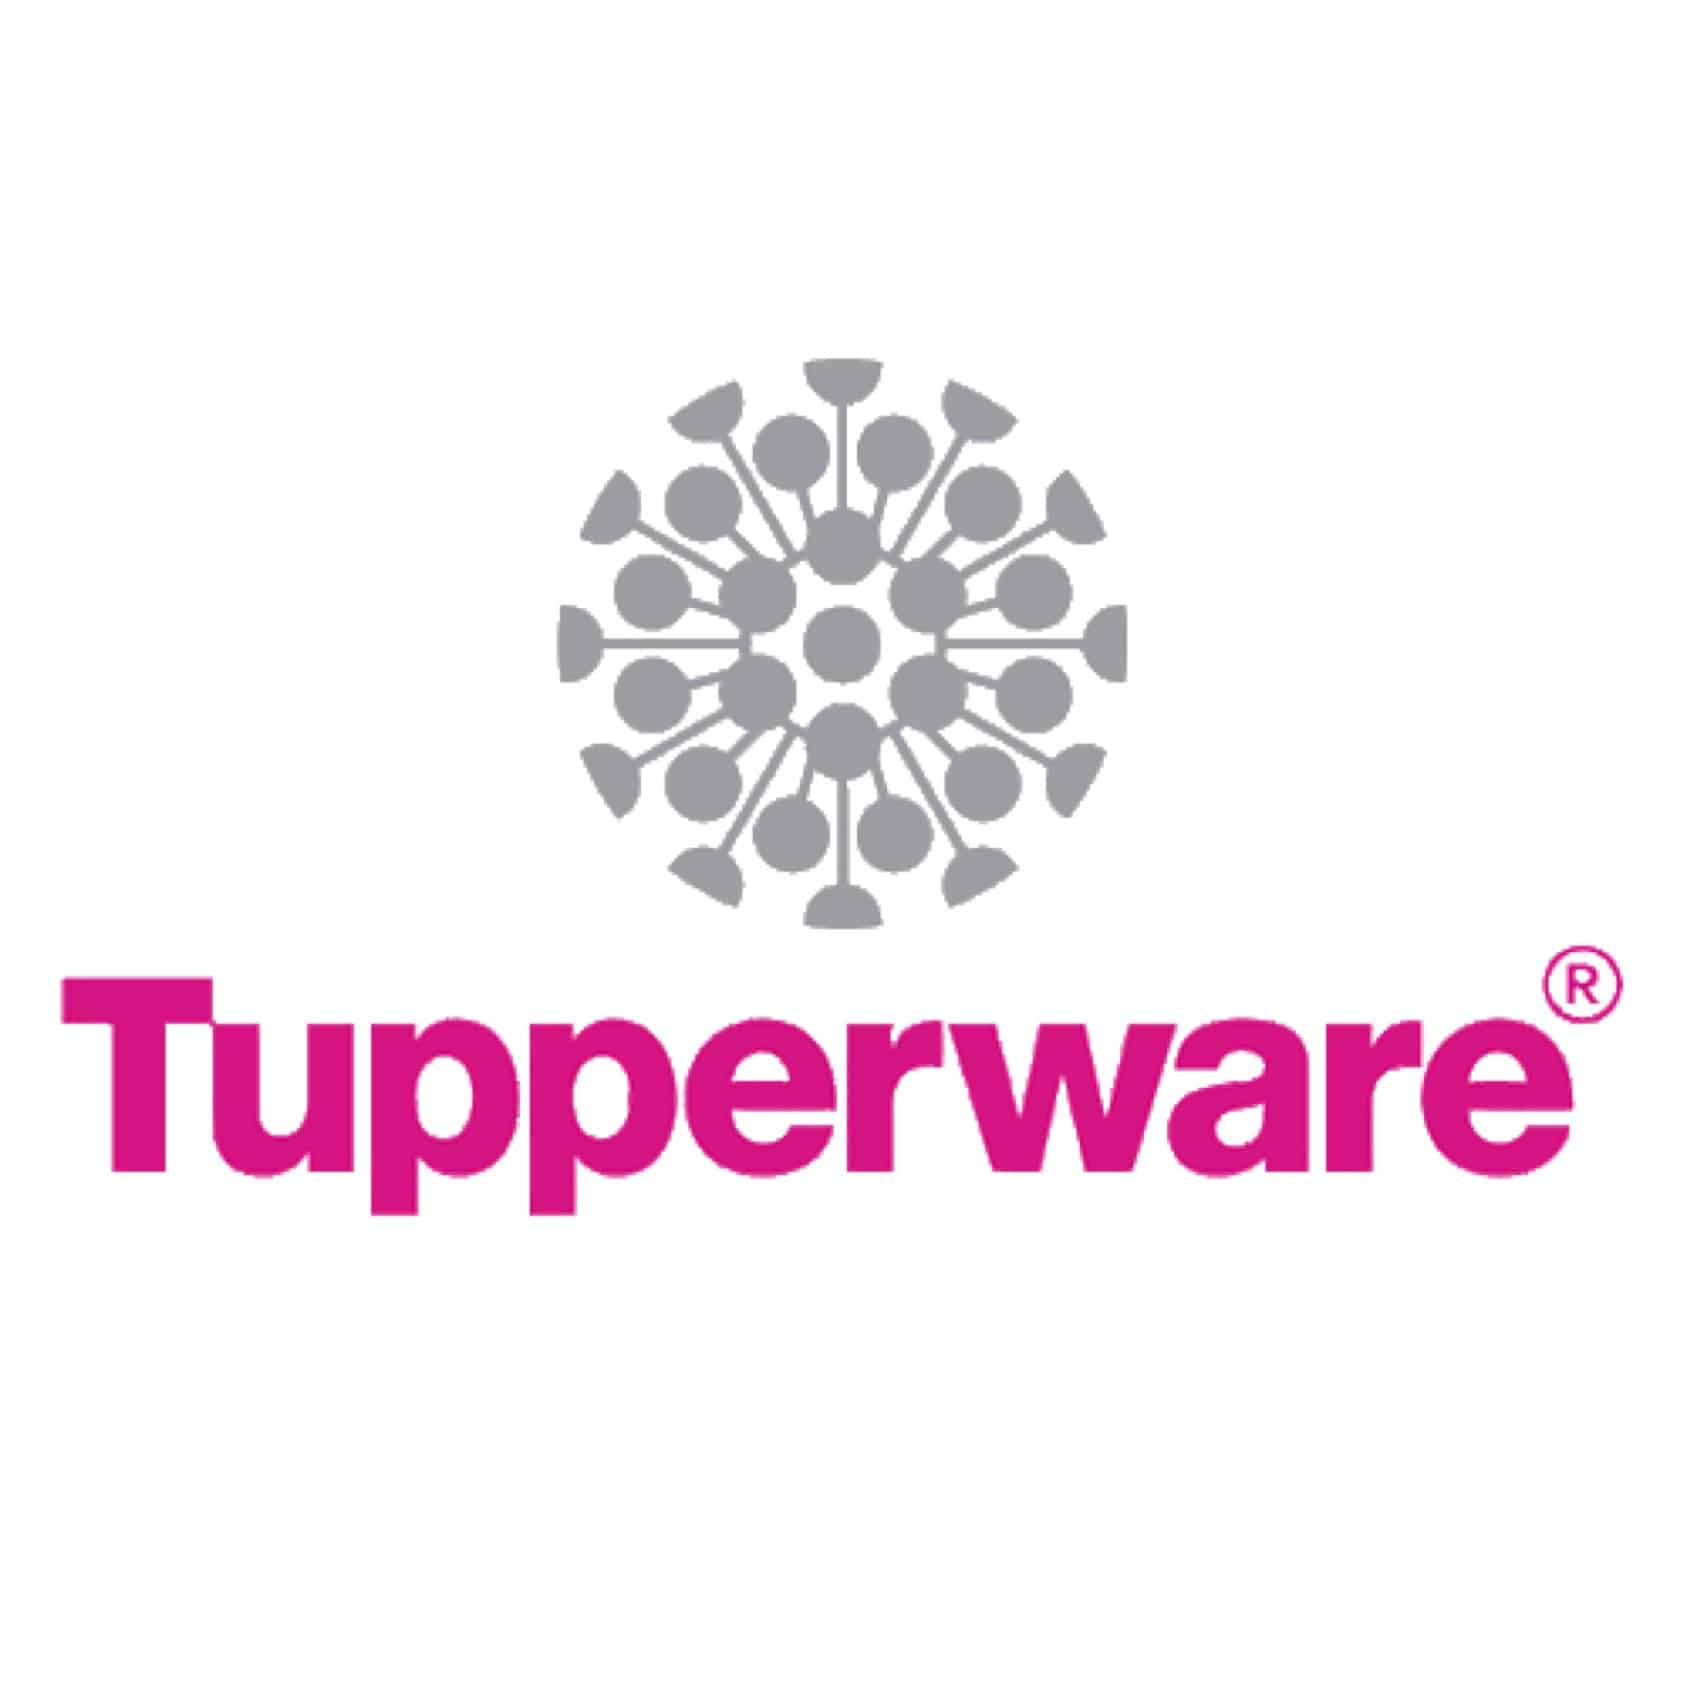 90 Tupperware Logo Images, Stock Photos, 3D objects, & Vectors |  Shutterstock